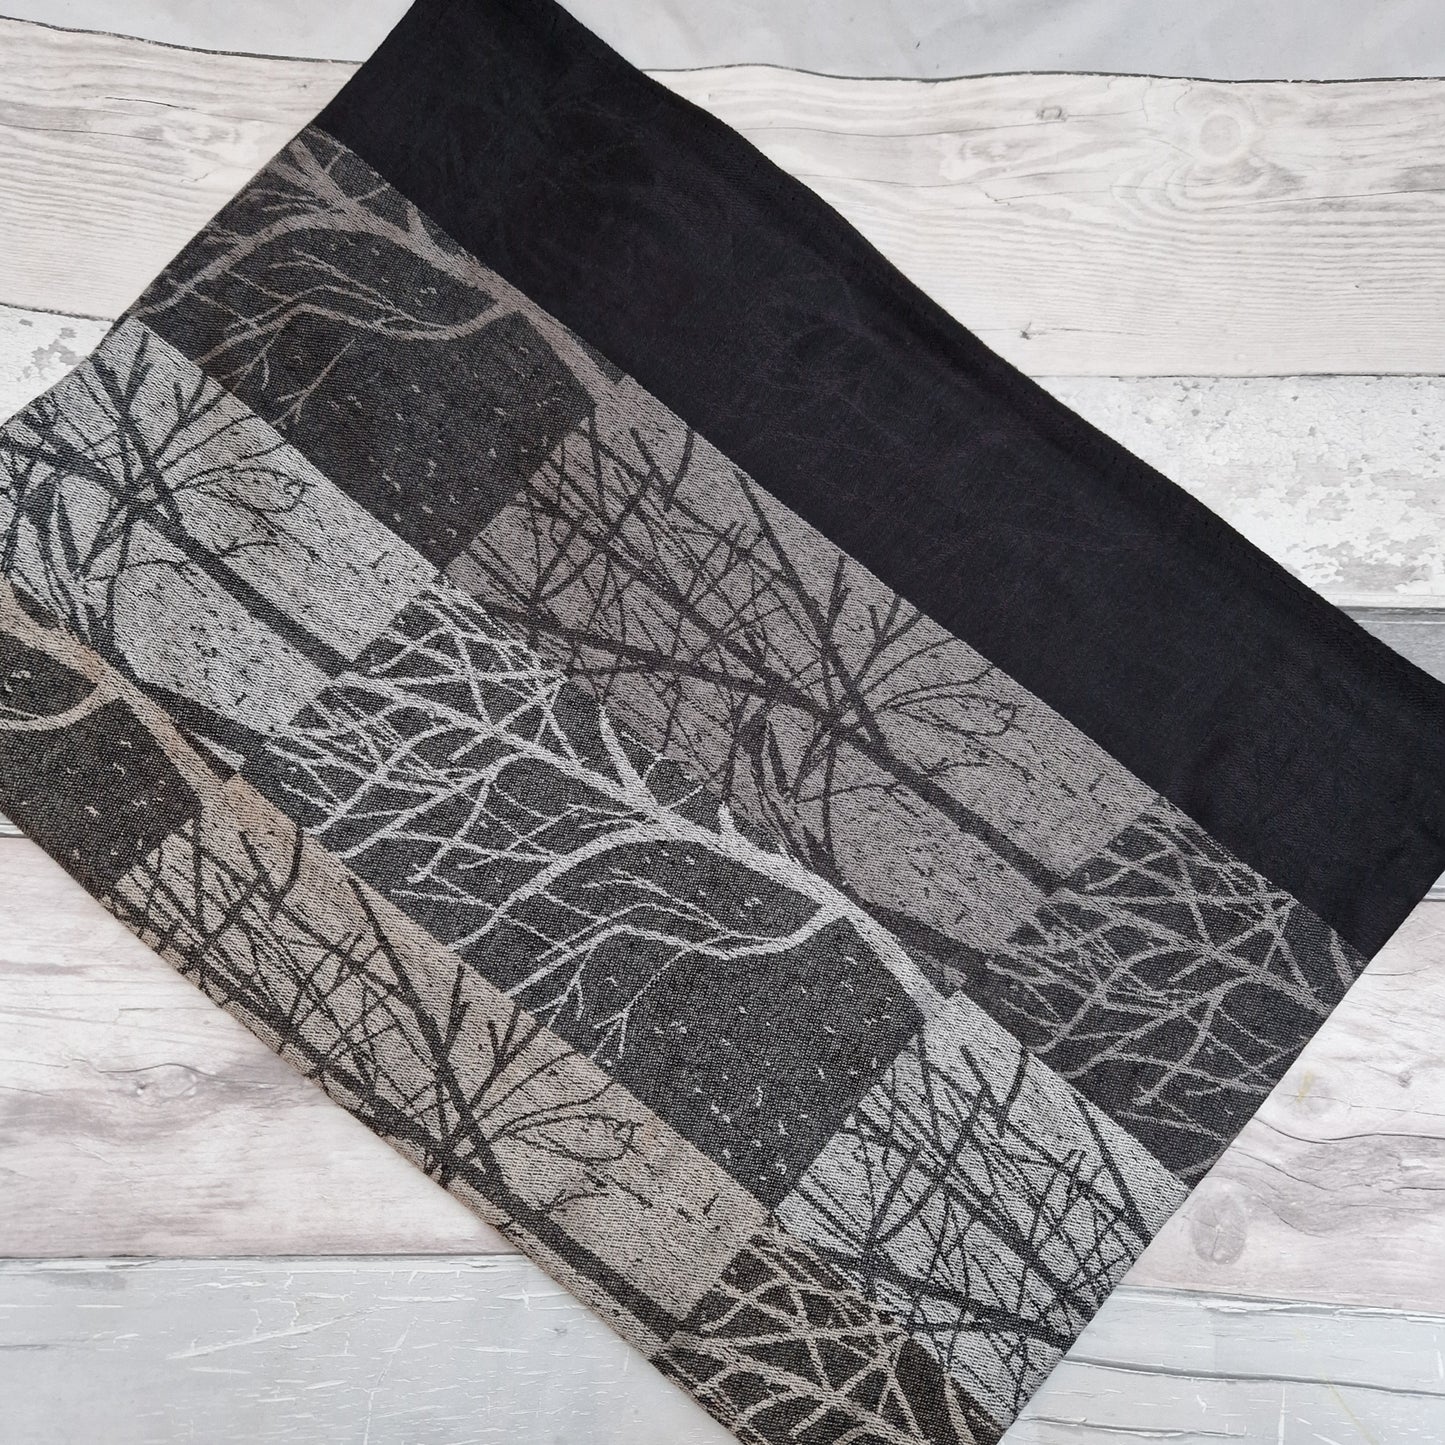 Woodland print scarf in black, silver and bronze.